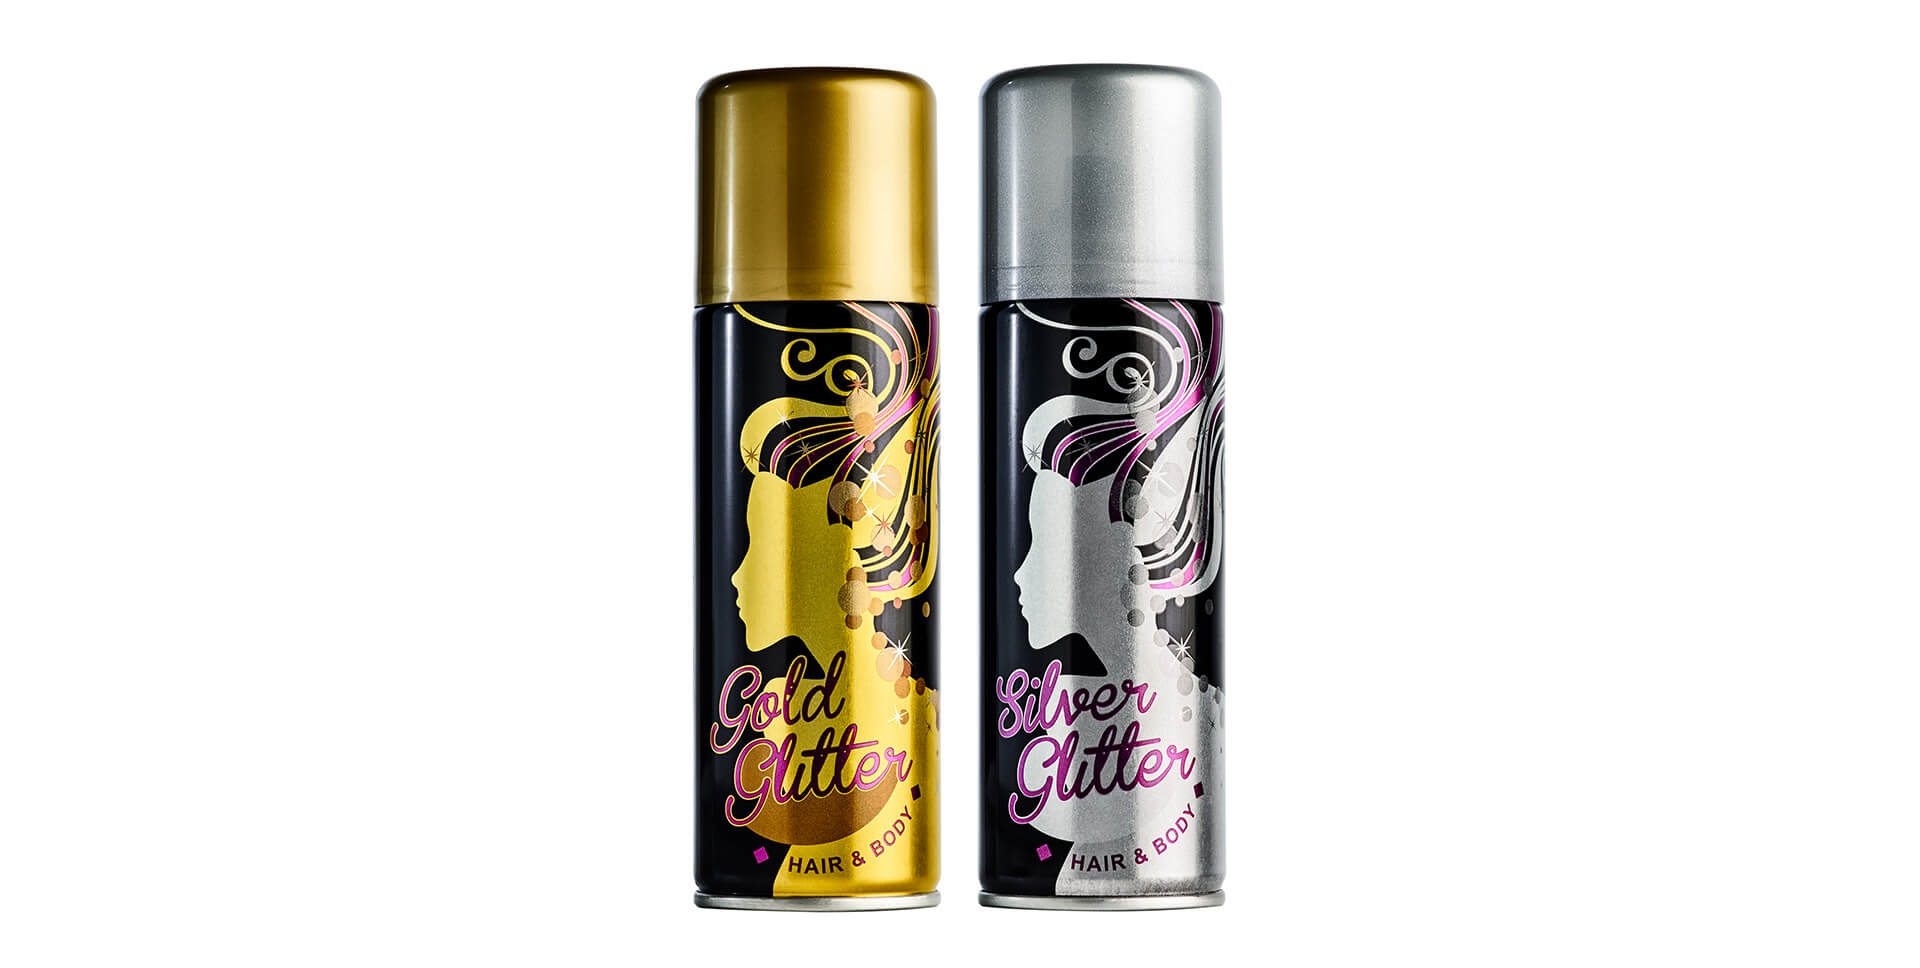 Insette - Hair and Body Glitter Spray